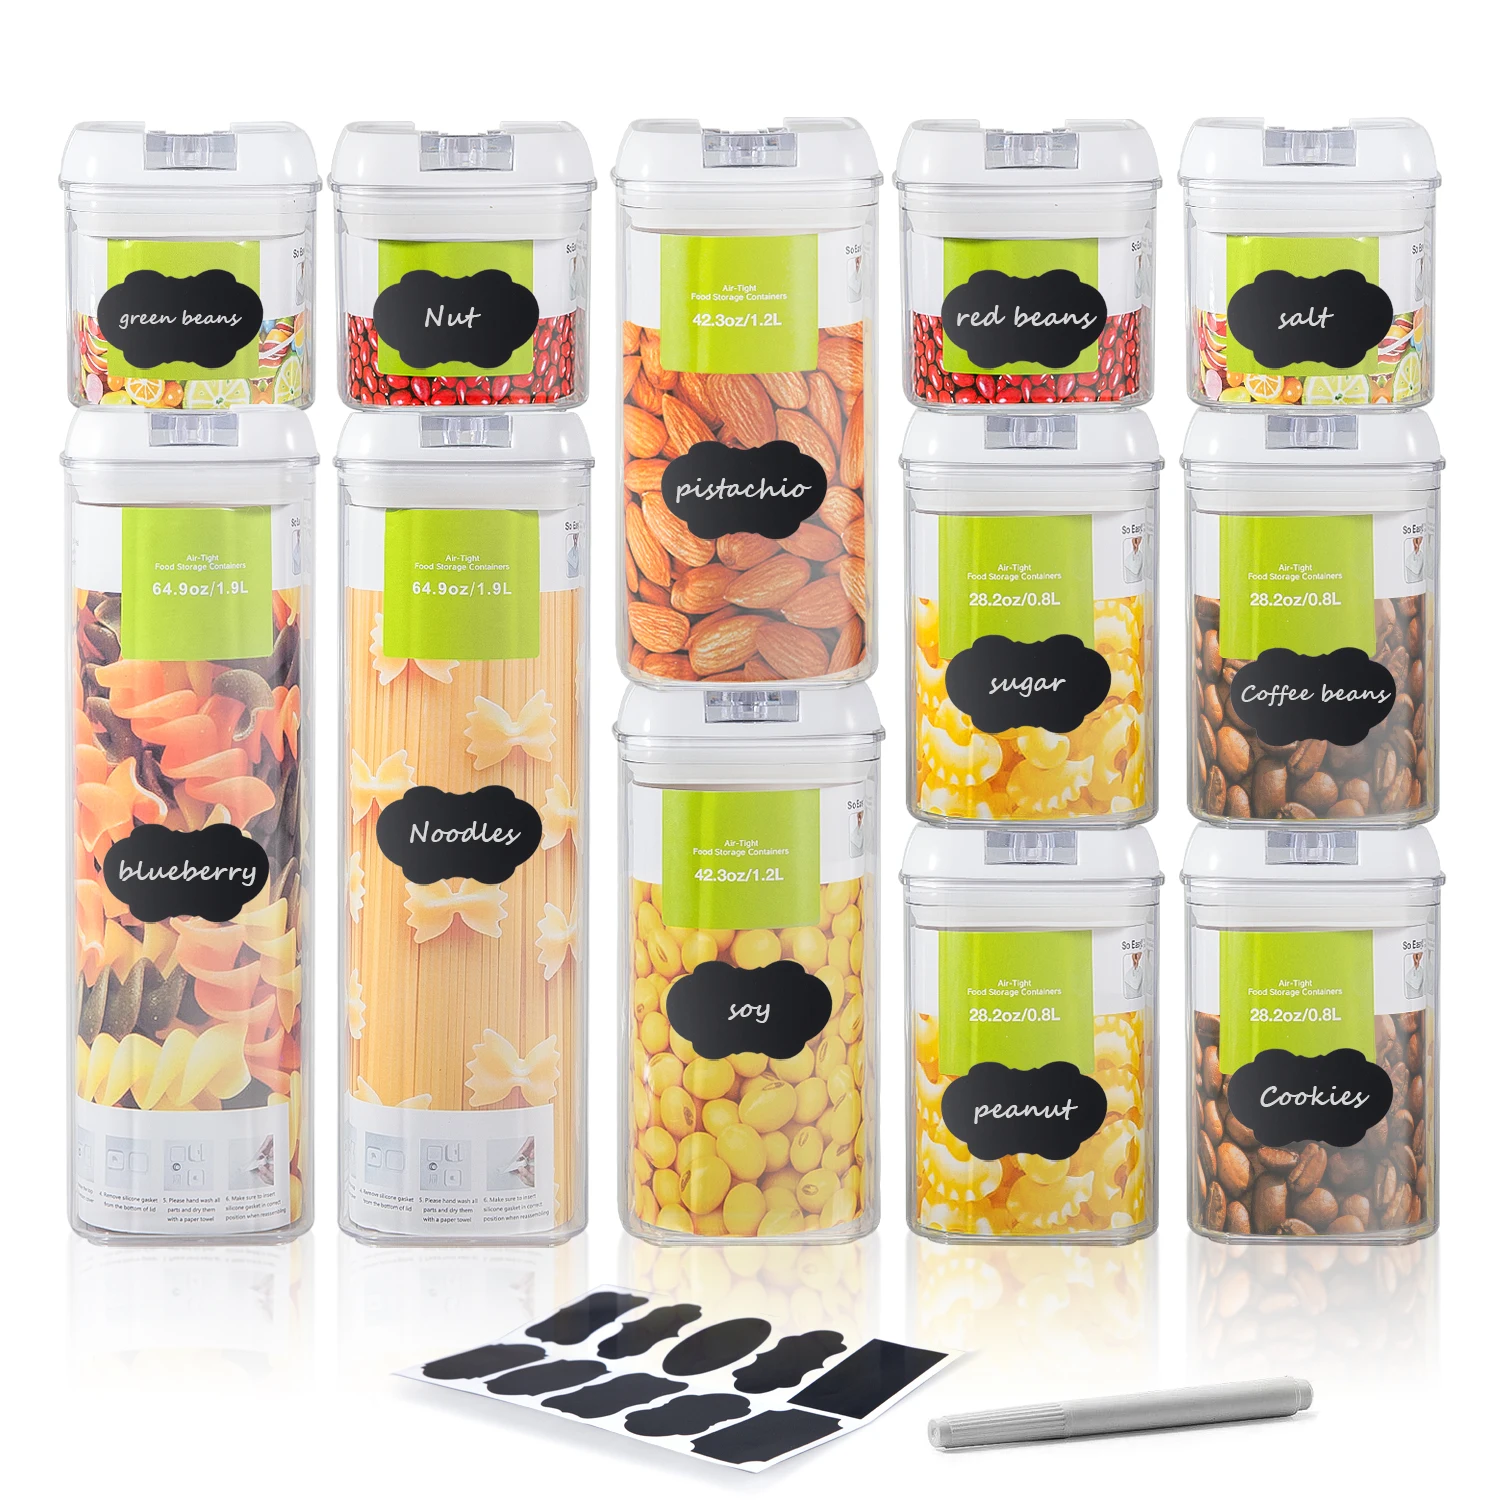 Airtight Food Storage Containers Set Kitchen & Pantry Organization BPA Free Plastic Canisters with Durable Lids Ideal for Cereal